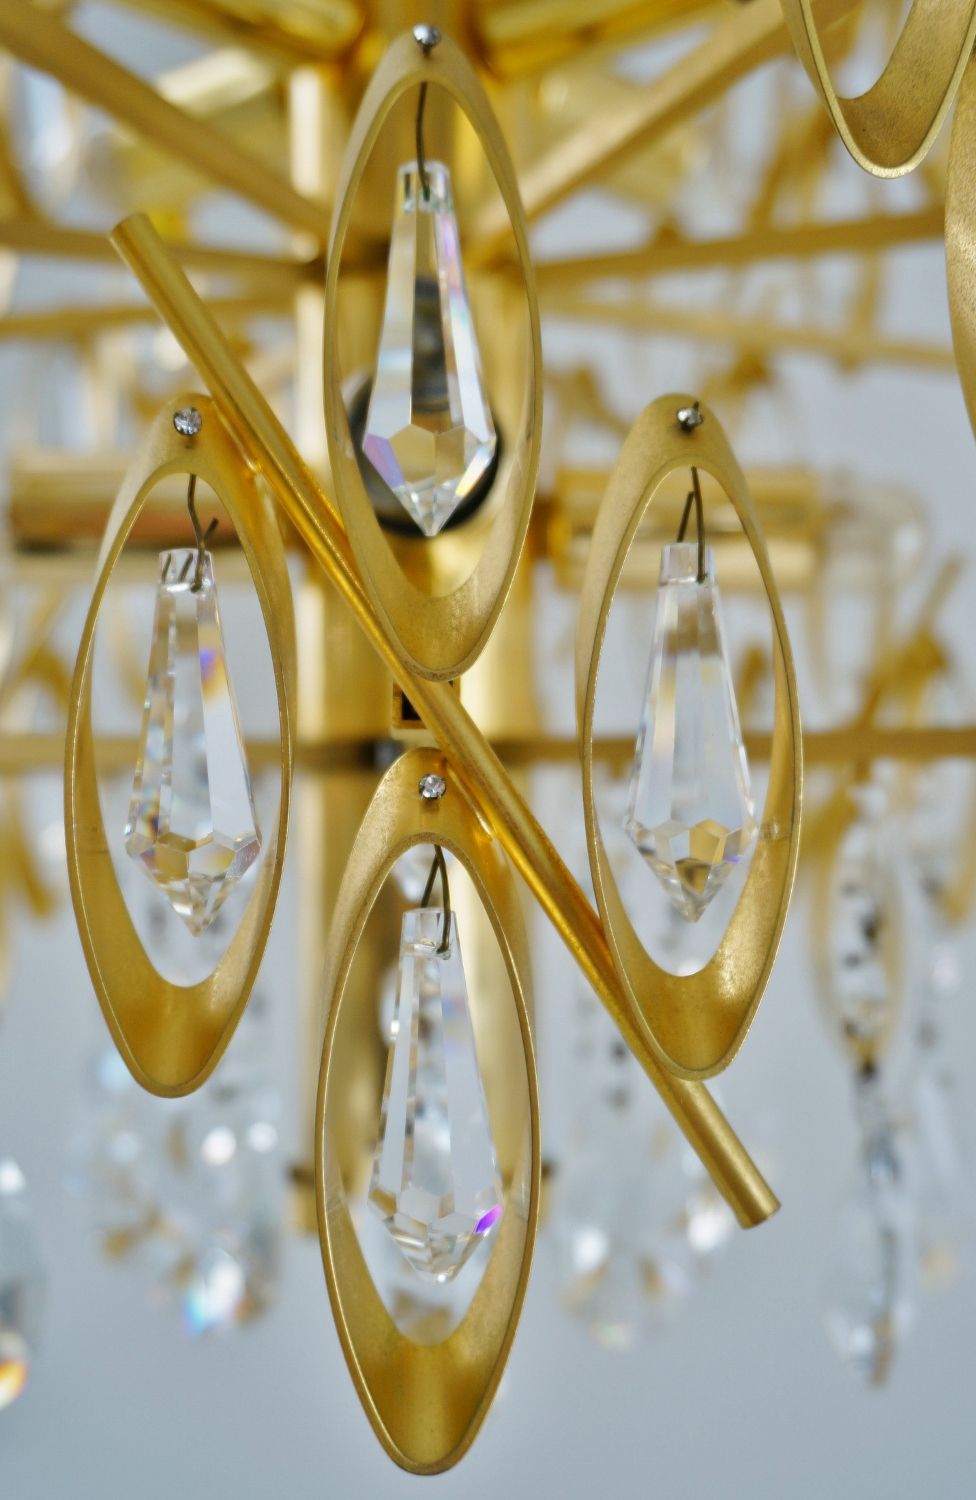 Lobmeyr Chandelier Gold Gilt Metal & Swarovski Crystals Intended For Warm Antique Gold Ring Chandeliers (View 2 of 15)